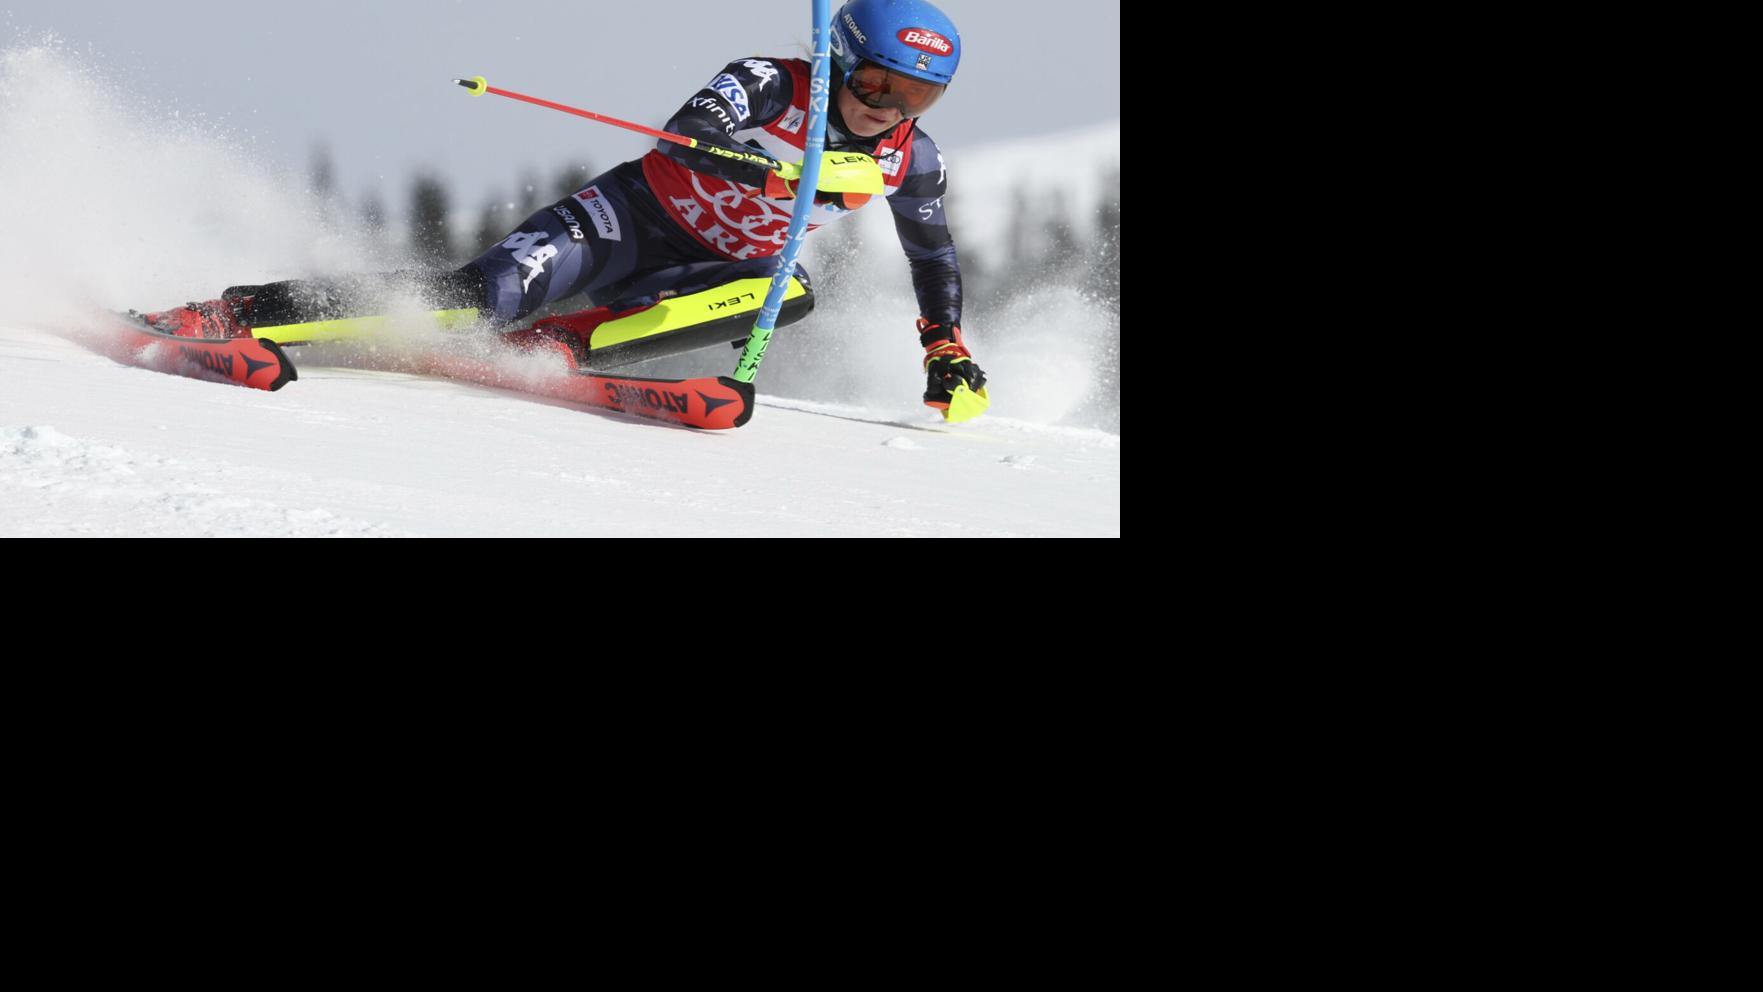 ‘Not done yet:’ Shiffrin continues quest for records